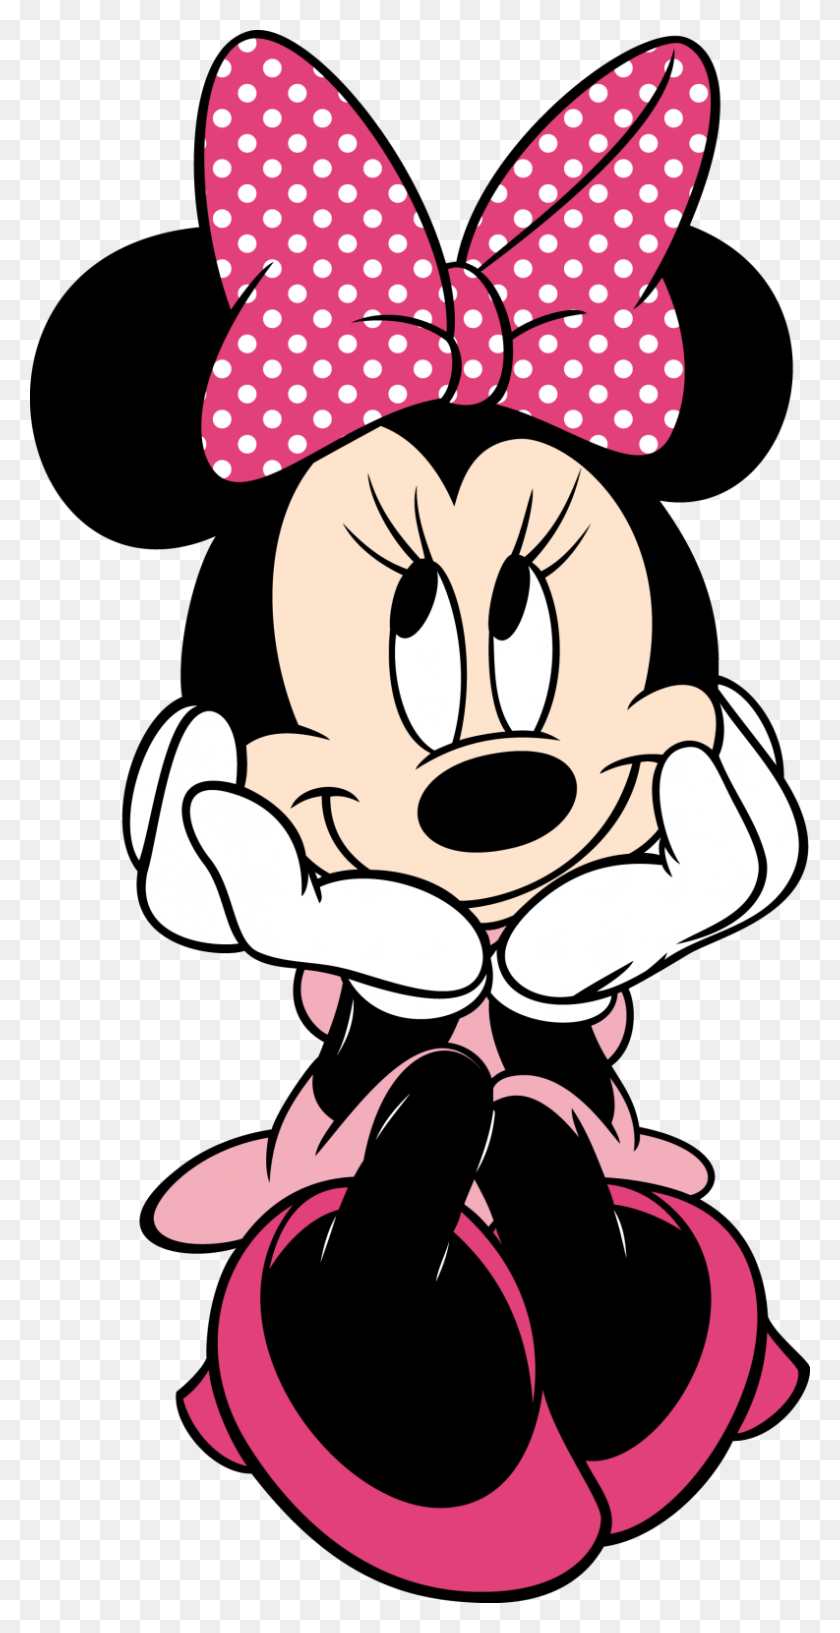 793x1600 Baby Minnie Head Png Loadtve - Minnie Mouse Head PNG